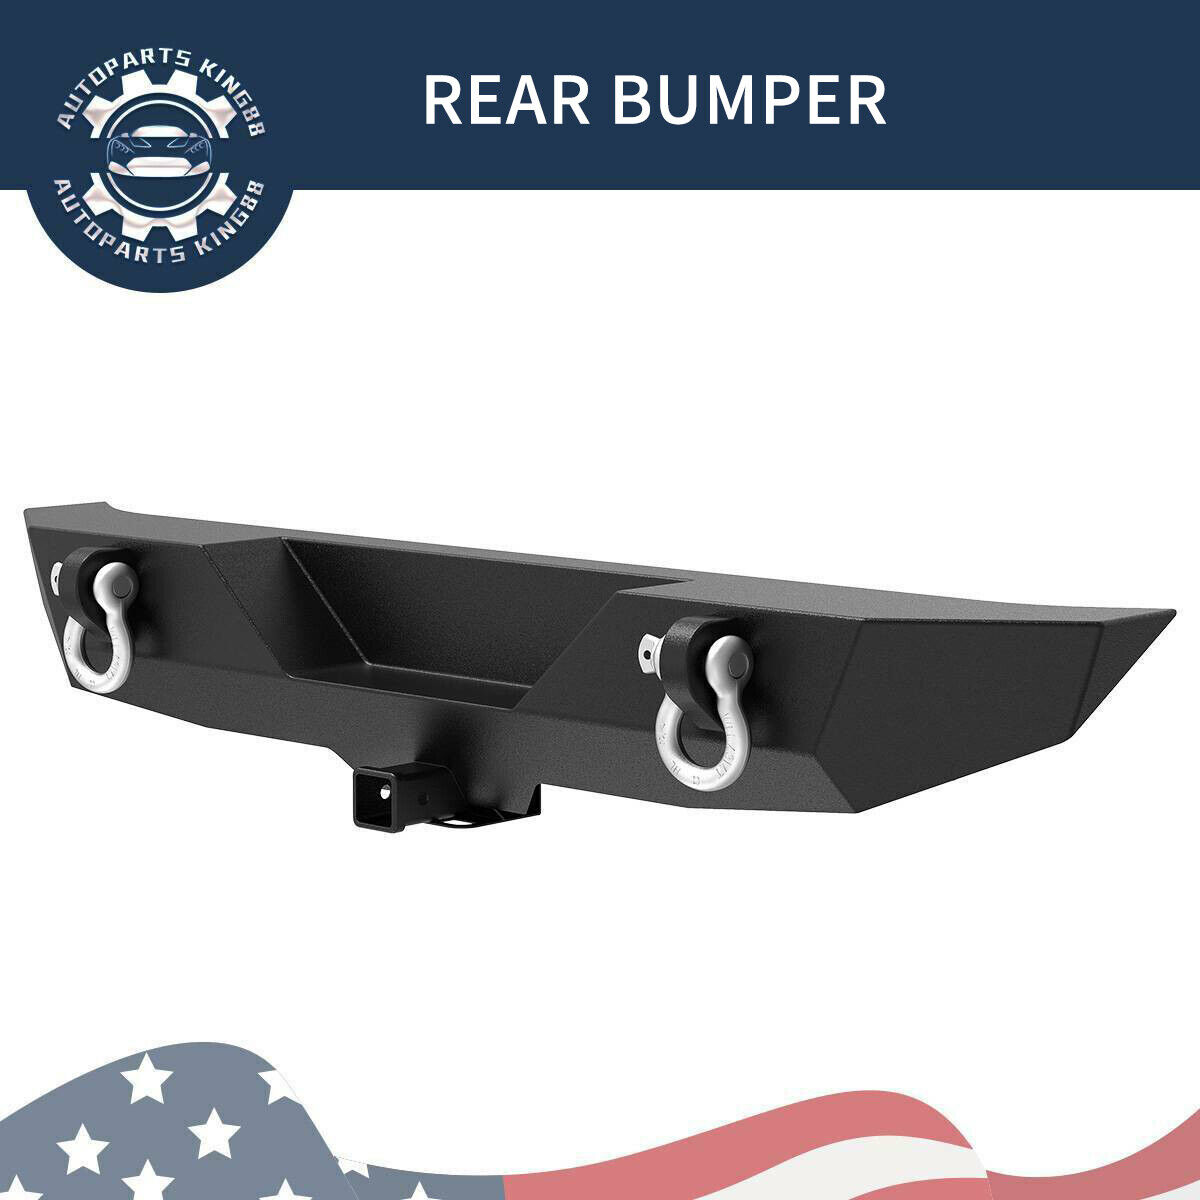 Powder Coated Rear Bumper for 07-18 Jeep Wrangler JK w/ Hitch Receiver & D-Rings